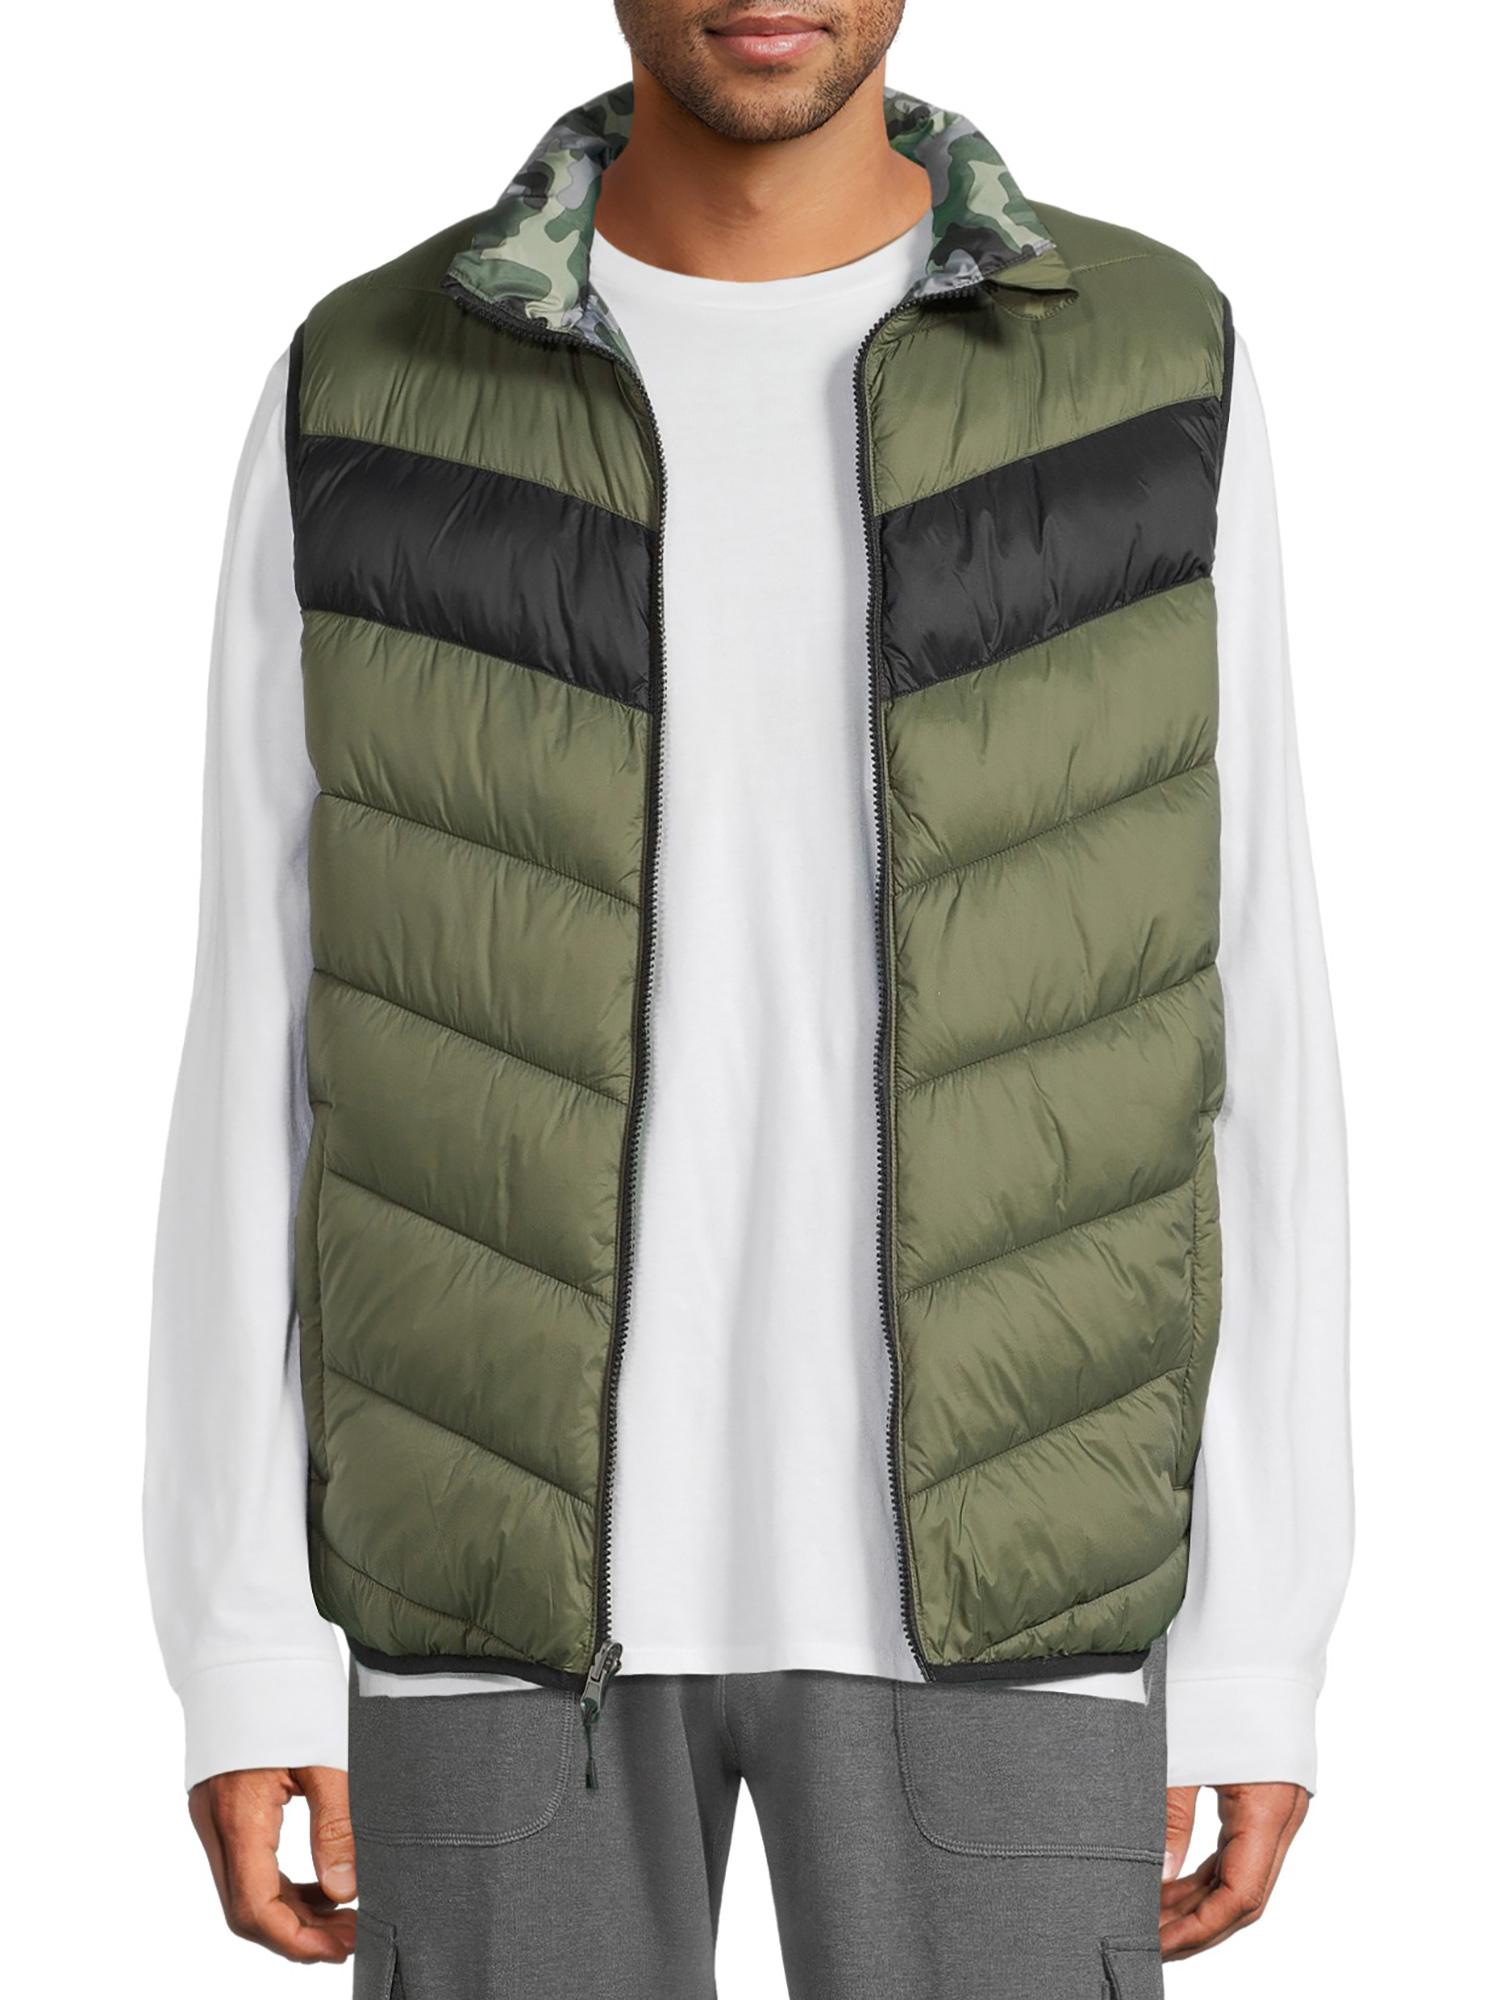 Swiss Tech Men's Reversible Puffer Vest, Up to Size 3XL - image 1 of 5